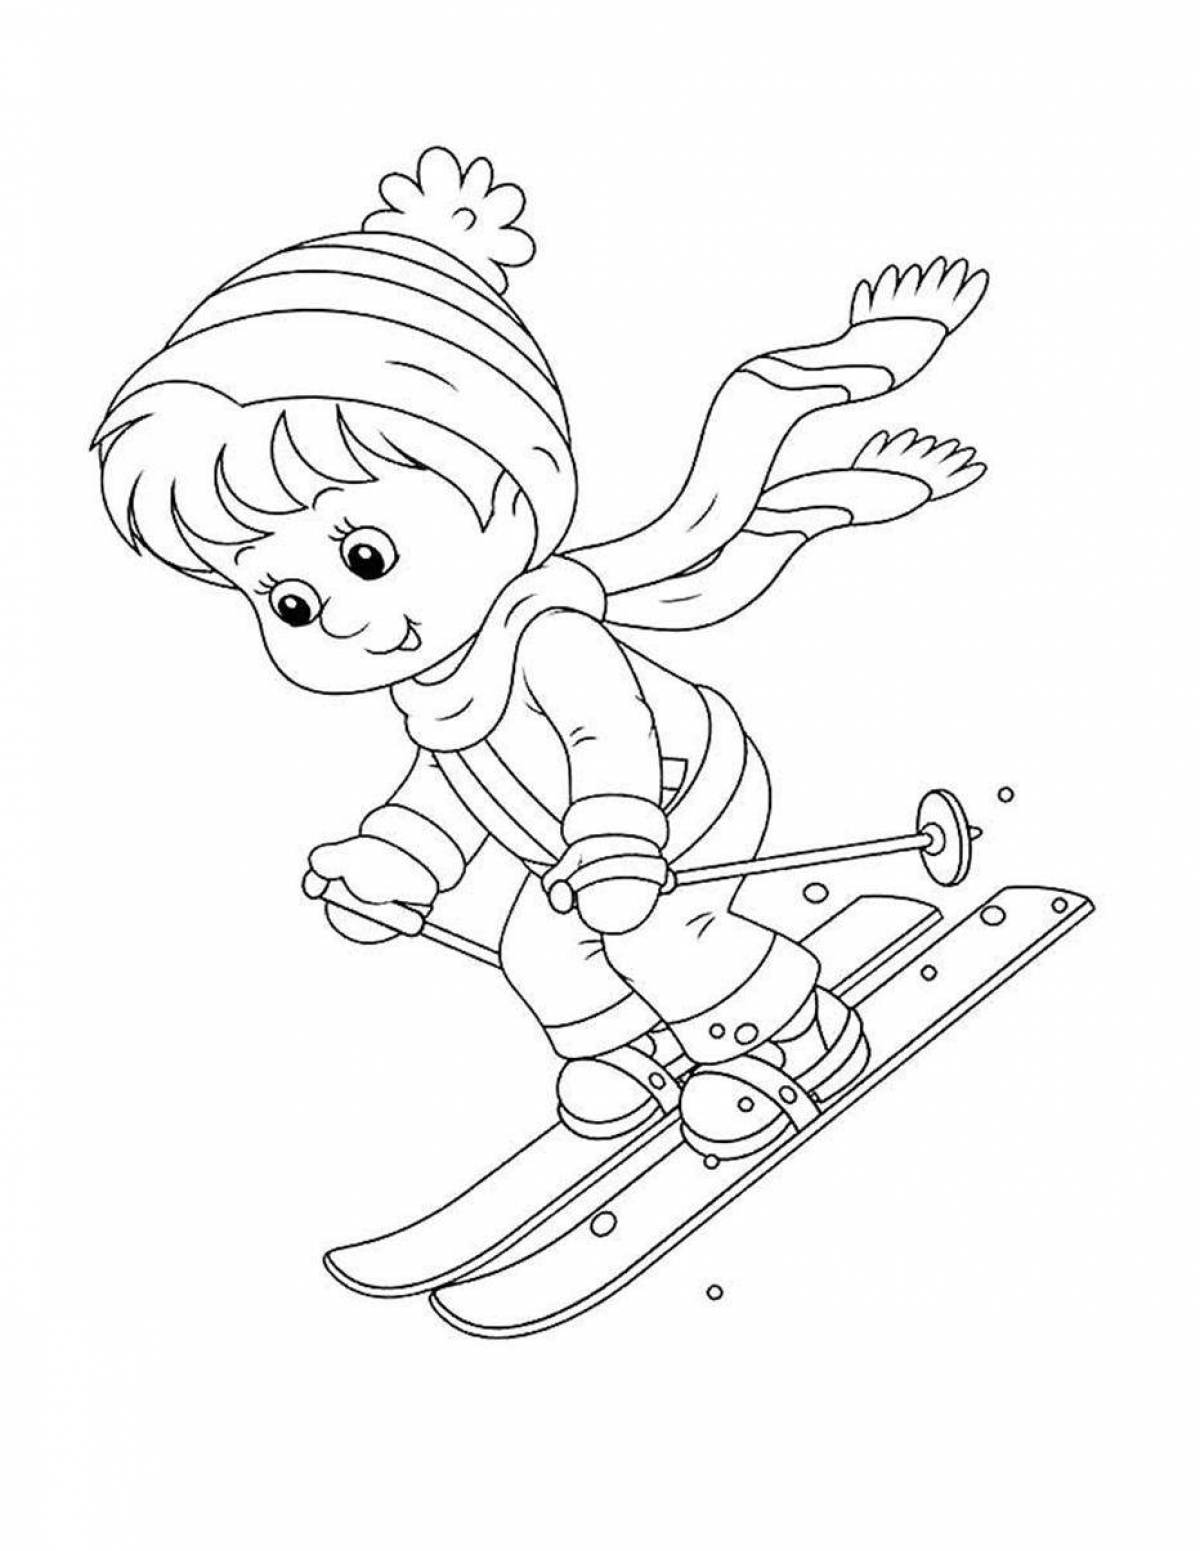 Awesome winter sports coloring pages for kids